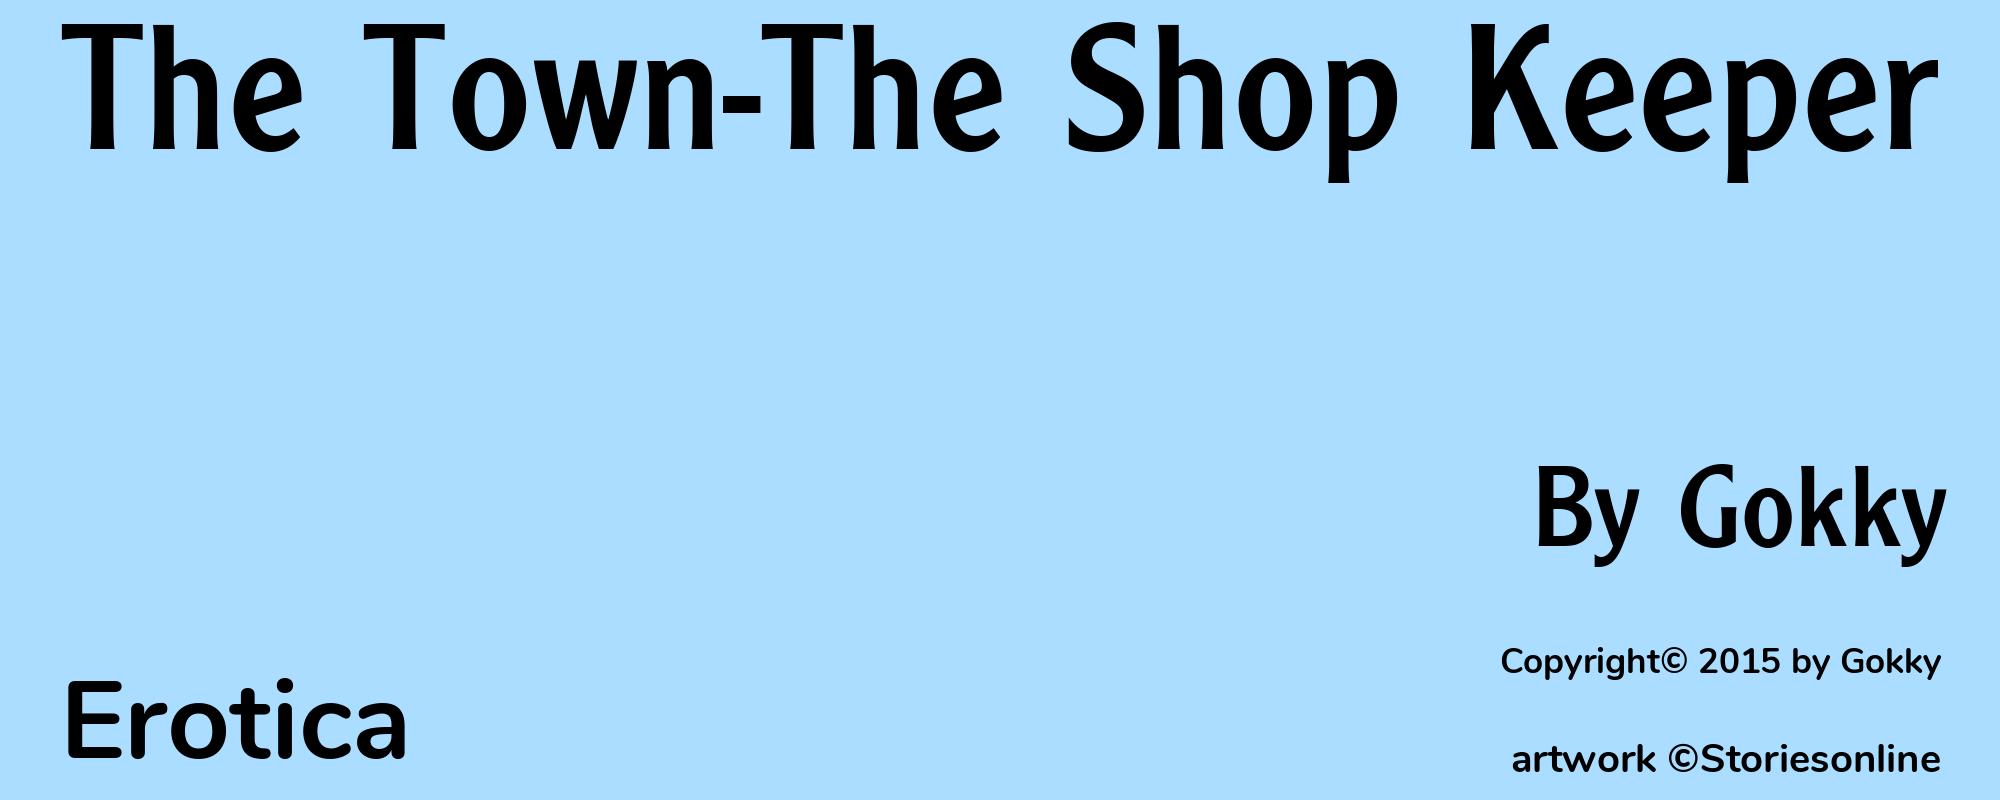 The Town-The Shop Keeper - Cover